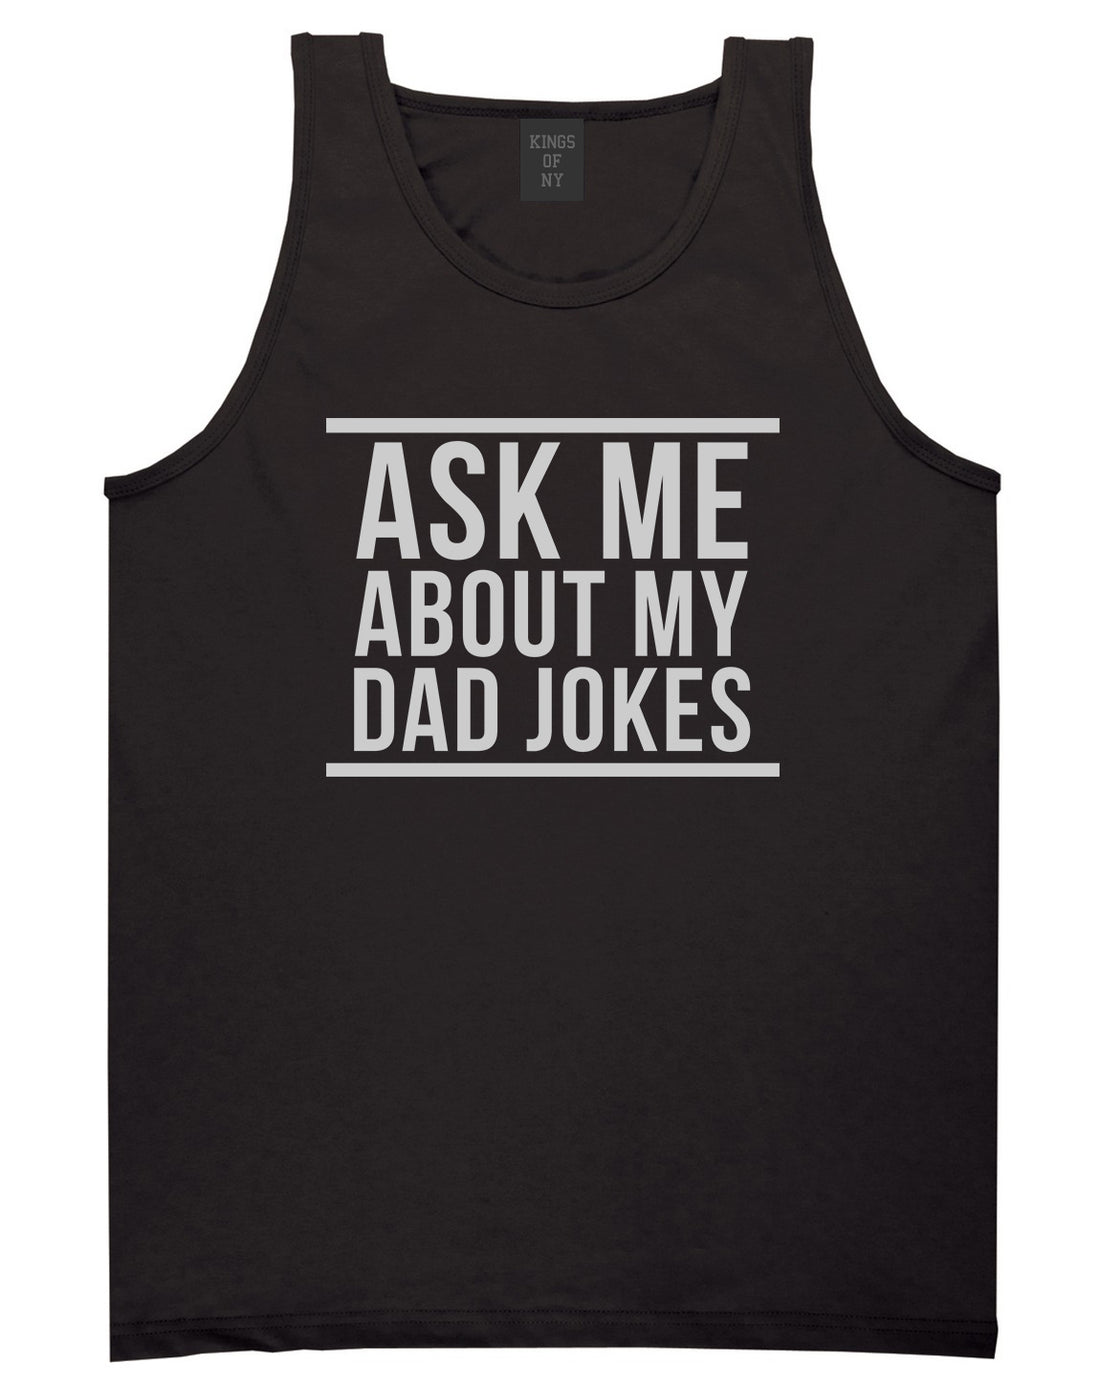 Ask Me About My Dad Jokes Mens Tank Top T-Shirt Black